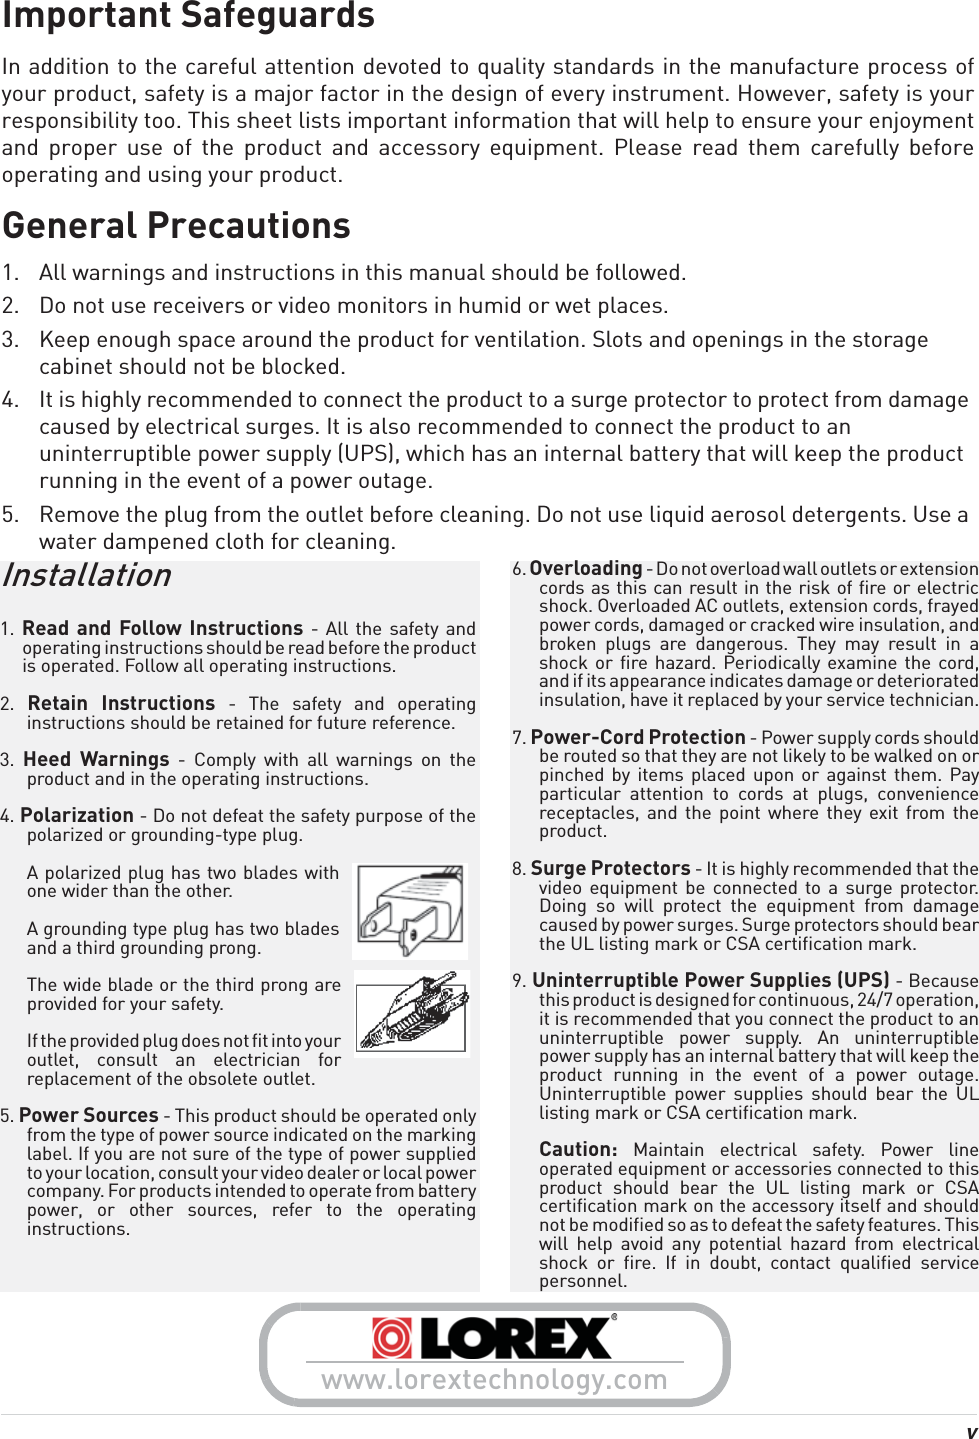 vImportant SafeguardsIn addition to the careful attention devoted to quality standards in the manufacture process of your product, safety is a major factor in the design of every instrument. However, safety is your responsibility too. This sheet lists important information that will help to ensure your enjoyment and proper use of the product and accessory equipment. Please read them carefully before operating and using your product.General Precautions1. All warnings and instructions in this manual should be followed.2. Do not use receivers or video monitors in humid or wet places. 3. Keep enough space around the product for ventilation. Slots and openings in the storage cabinet should not be blocked.4. It is highly recommended to connect the product to a surge protector to protect from damage caused by electrical surges. It is also recommended to connect the product to an uninterruptible power supply (UPS), which has an internal battery that will keep the product running in the event of a power outage.5. Remove the plug from the outlet before cleaning. Do not use liquid aerosol detergents. Use a water dampened cloth for cleaning.6. Overloading - Do not overload wall outlets or extension cords as this can result in the risk of fire or electric shock. Overloaded AC outlets, extension cords, frayed power cords, damaged or cracked wire insulation, and broken plugs are dangerous. They may result in a shock or fire hazard. Periodically examine the cord, and if its appearance indicates damage or deteriorated insulation, have it replaced by your service technician.7. Power-Cord Protection - Power supply cords should be routed so that they are not likely to be walked on or pinched by items placed upon or against them. Pay particular attention to cords at plugs, convenience receptacles, and the point where they exit from the product.8. Surge Protectors - It is highly recommended that the video equipment be connected to a surge protector. Doing so will protect the equipment from damage caused by power surges. Surge protectors should bear the UL listing mark or CSA certification mark.9. Uninterruptible Power Supplies (UPS) - Because this product is designed for continuous, 24/7 operation, it is recommended that you connect the product to an uninterruptible power supply. An uninterruptible power supply has an internal battery that will keep the product running in the event of a power outage. Uninterruptible power supplies should bear the UL listing mark or CSA certification mark.Caution: Maintain electrical safety. Power line operated equipment or accessories connected to this product should bear the UL listing mark or CSA certification mark on the accessory itself and should not be modified so as to defeat the safety features. This will help avoid any potential hazard from electrical shock or fire. If in doubt, contact qualified service personnel.Installation1. Read and Follow Instructions - All the safety and operating instructions should be read before the product is operated. Follow all operating instructions.2.  Retain Instructions - The safety and operating instructions should be retained for future reference.3.  Heed Warnings - Comply with all warnings on the product and in the operating instructions.4. Polarization - Do not defeat the safety purpose of the polarized or grounding-type plug.A polarized plug has two blades with one wider than the other.A grounding type plug has two blades and a third grounding prong.The wide blade or the third prong are provided for your safety.If the provided plug does not fit into your outlet, consult an electrician for replacement of the obsolete outlet.5. Power Sources - This product should be operated only from the type of power source indicated on the marking label. If you are not sure of the type of power supplied to your location, consult your video dealer or local power company. For products intended to operate from battery power, or other sources, refer to the operating instructions.www.lorextechnology.com